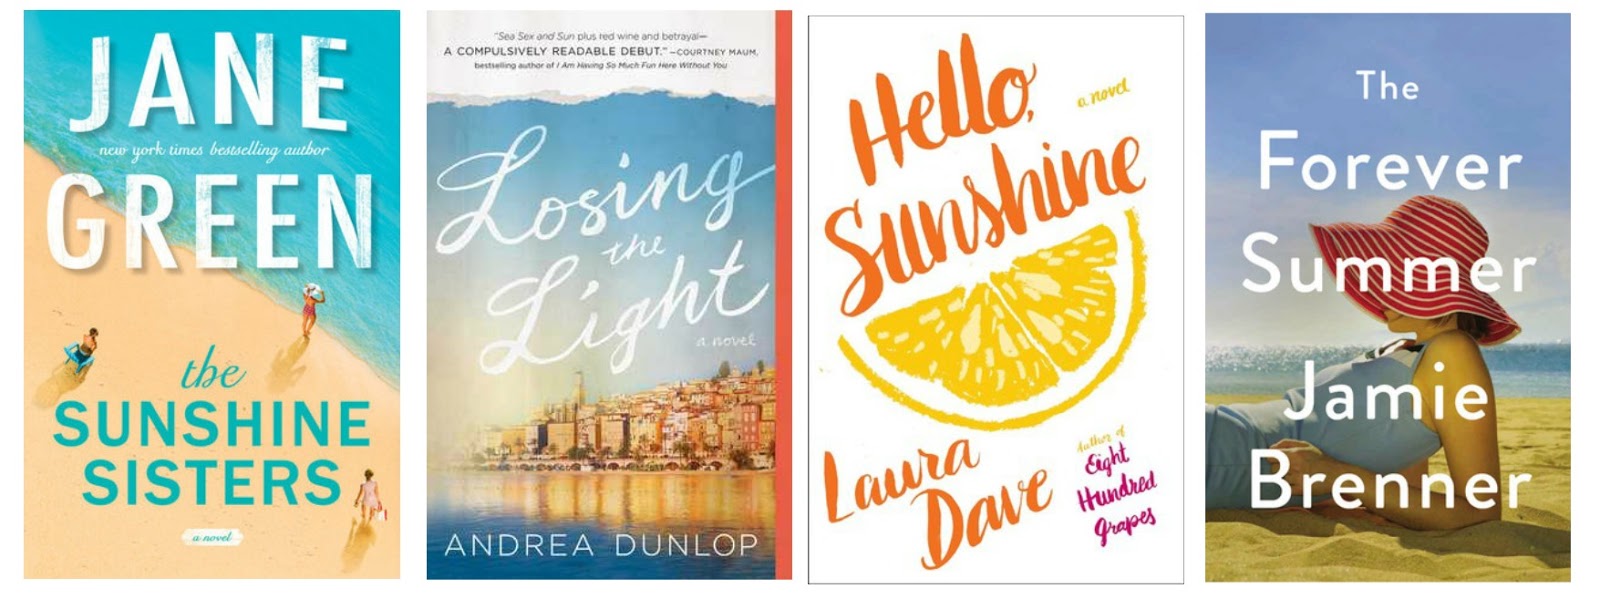 Books that Bring a Ray of Sunshine